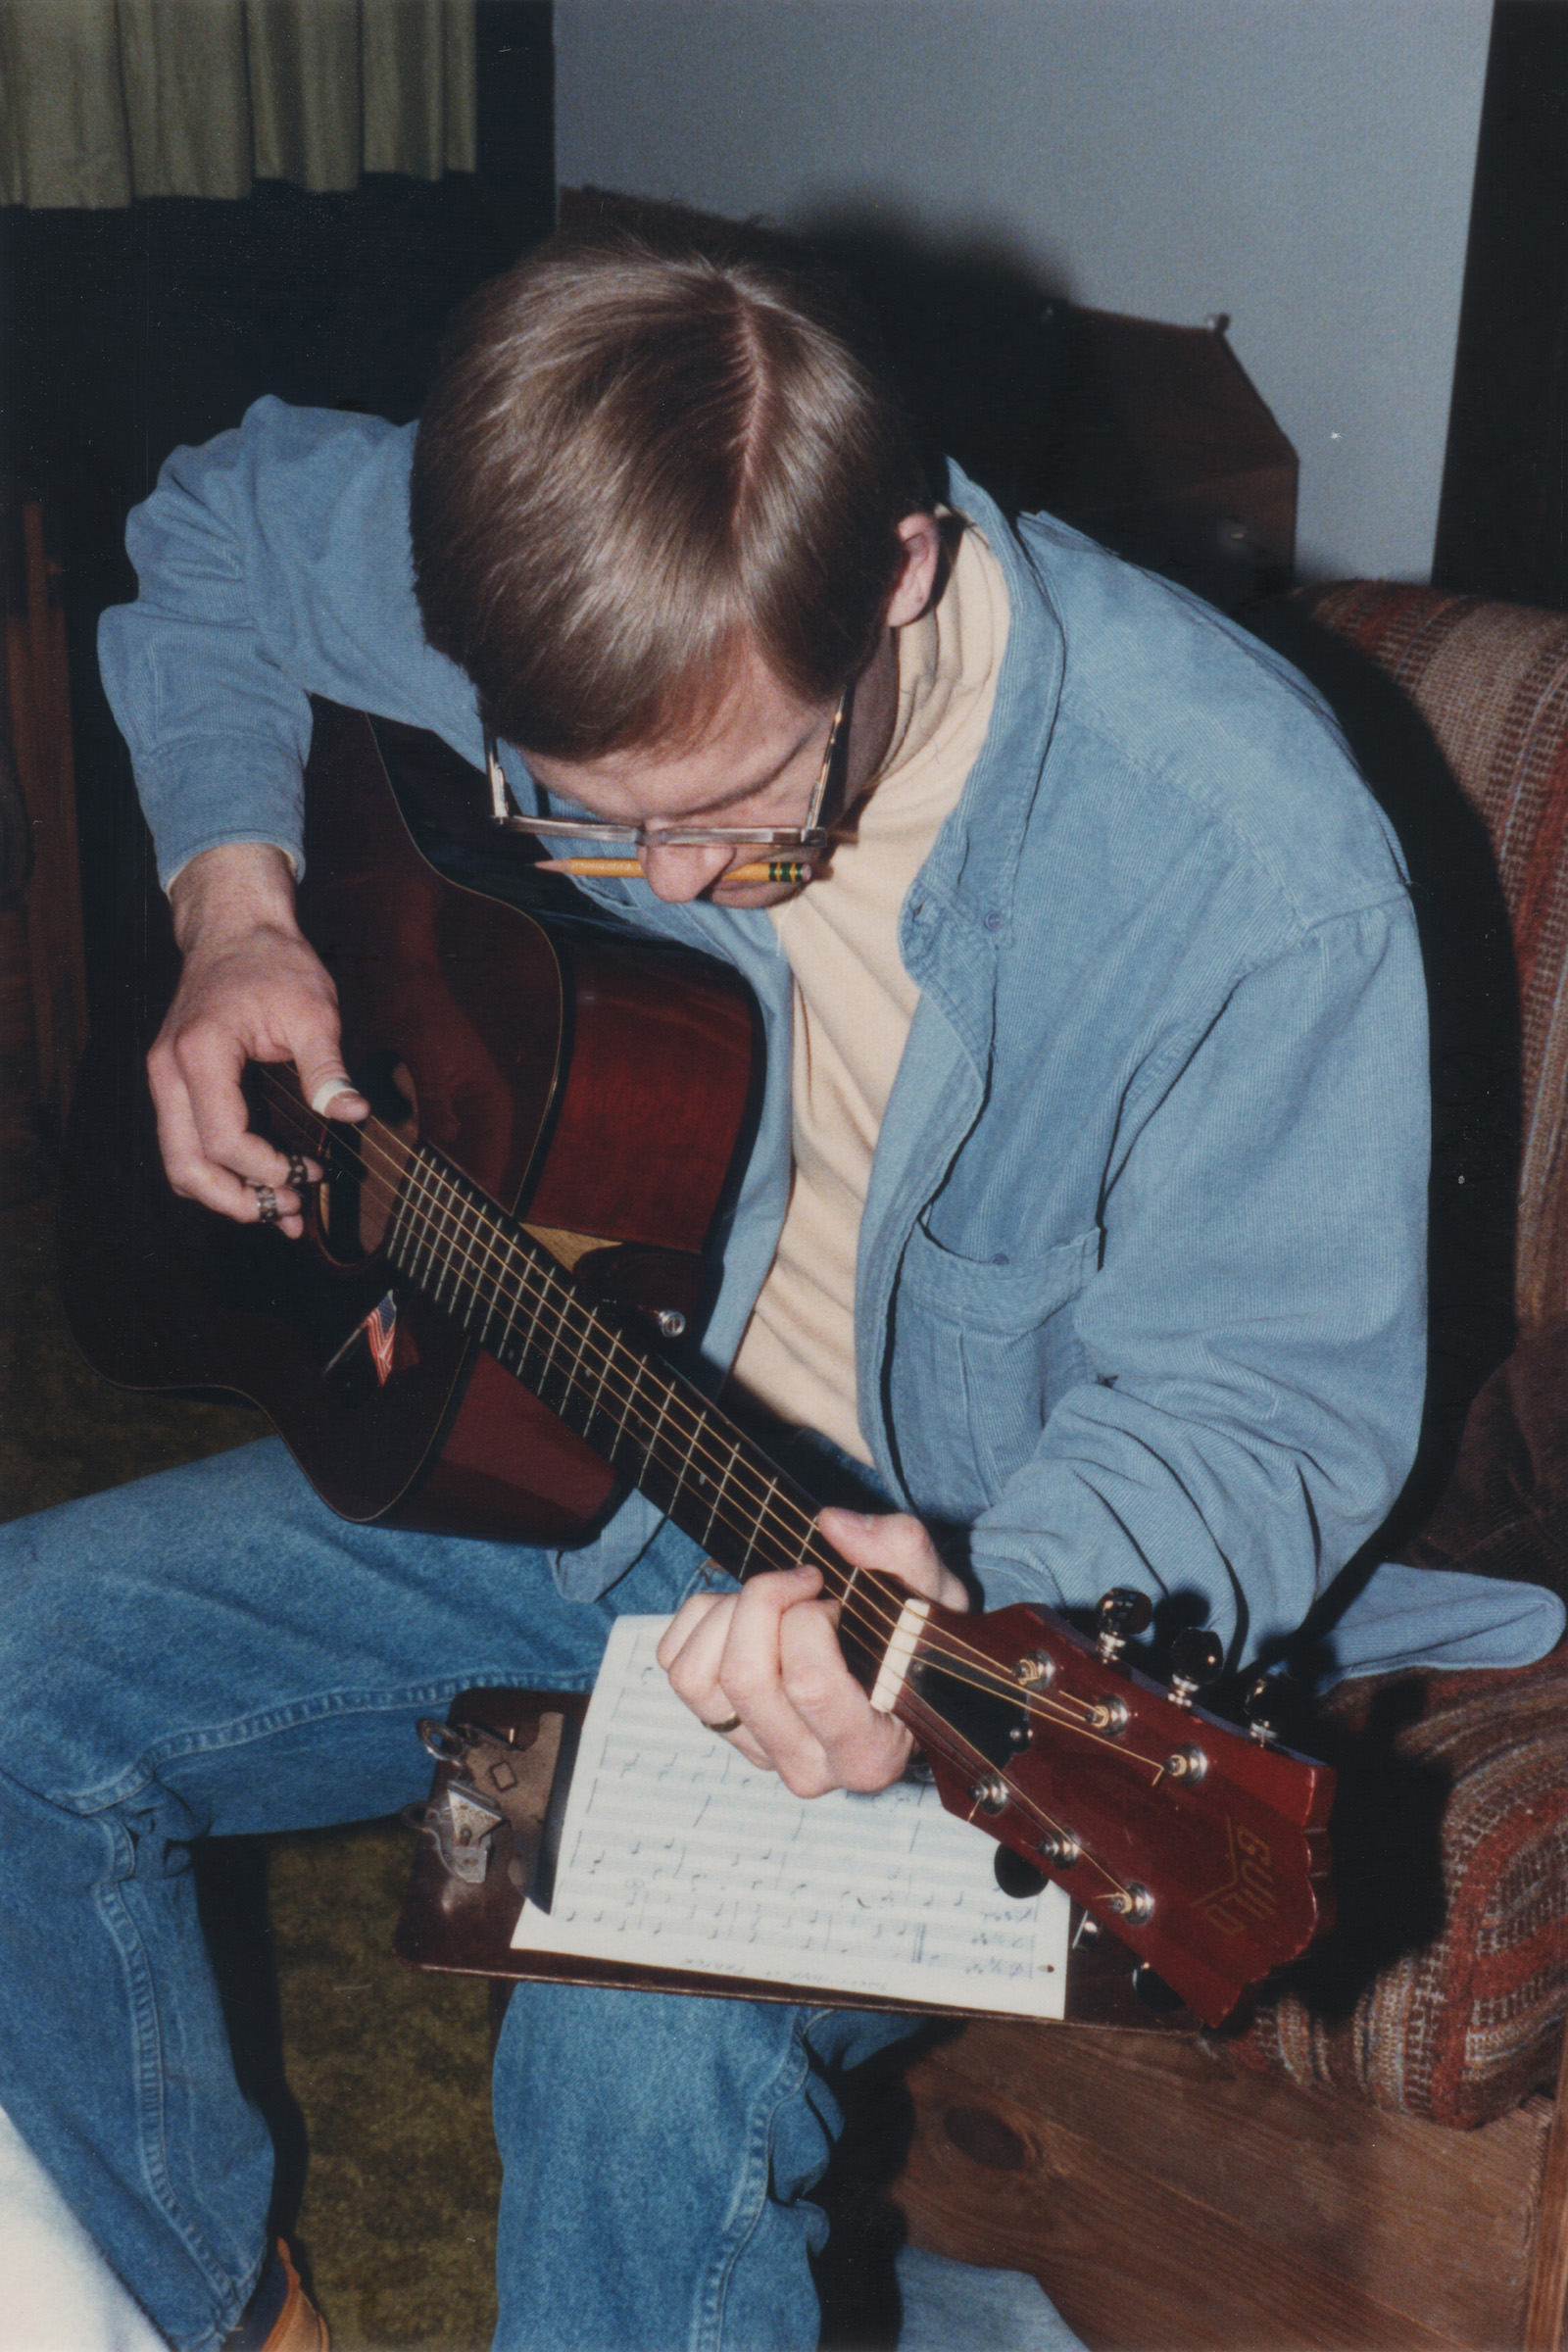 American songwriter Bill Schachter – pencil clenched in teeth, playing guitar with fingerpicks while reading handwritten sheet music.